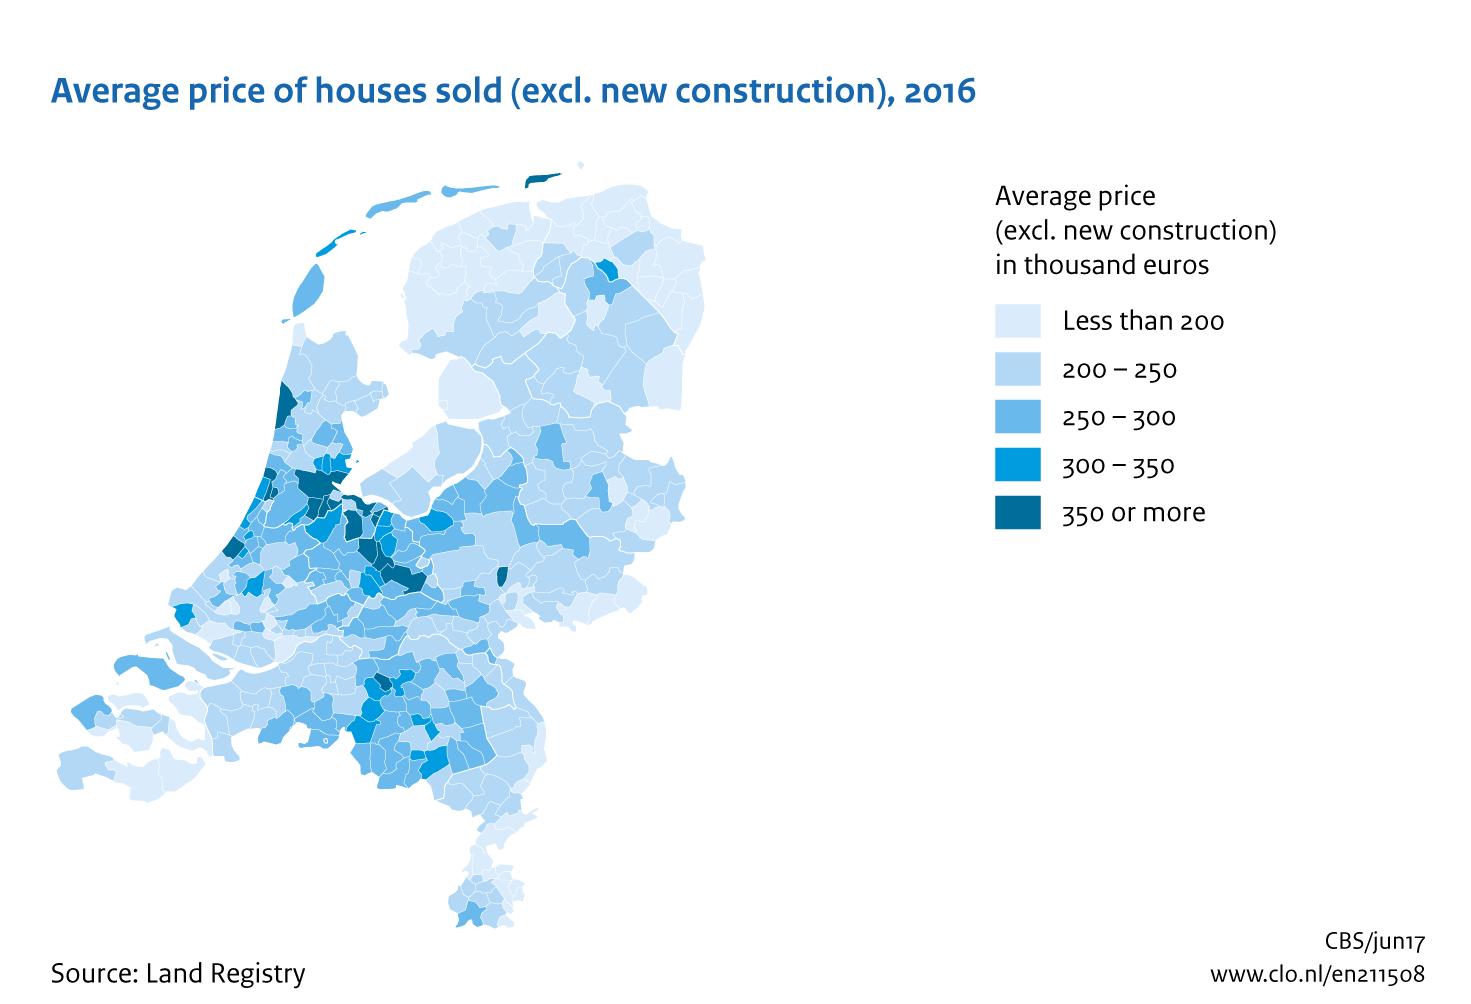 Image  Average price of houses sold (excl. new construction), 2016. The image is further explained in the text.